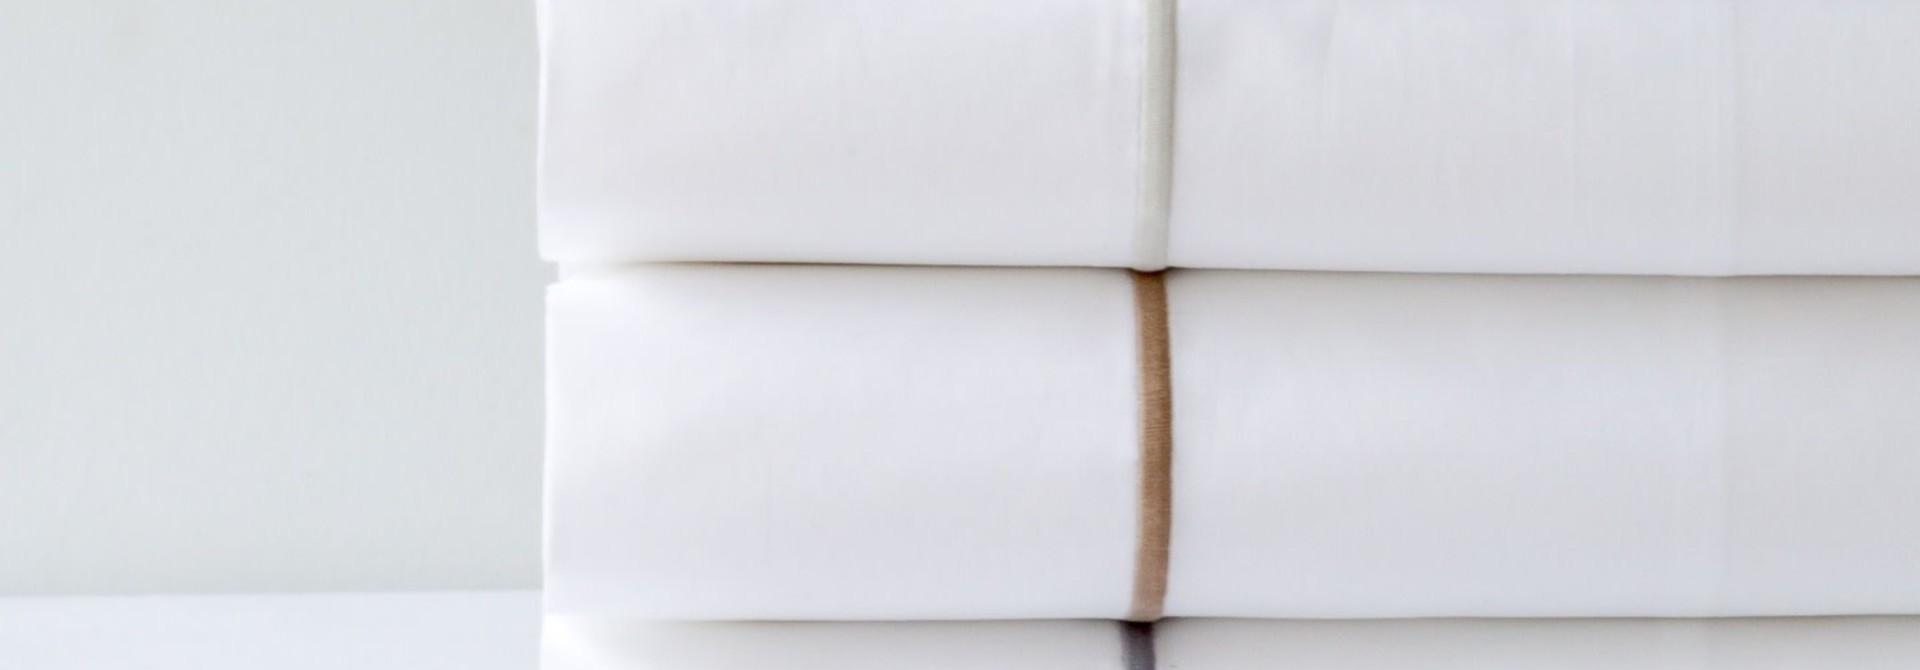 Classic Hotel | The Bovi Sheeting Collection